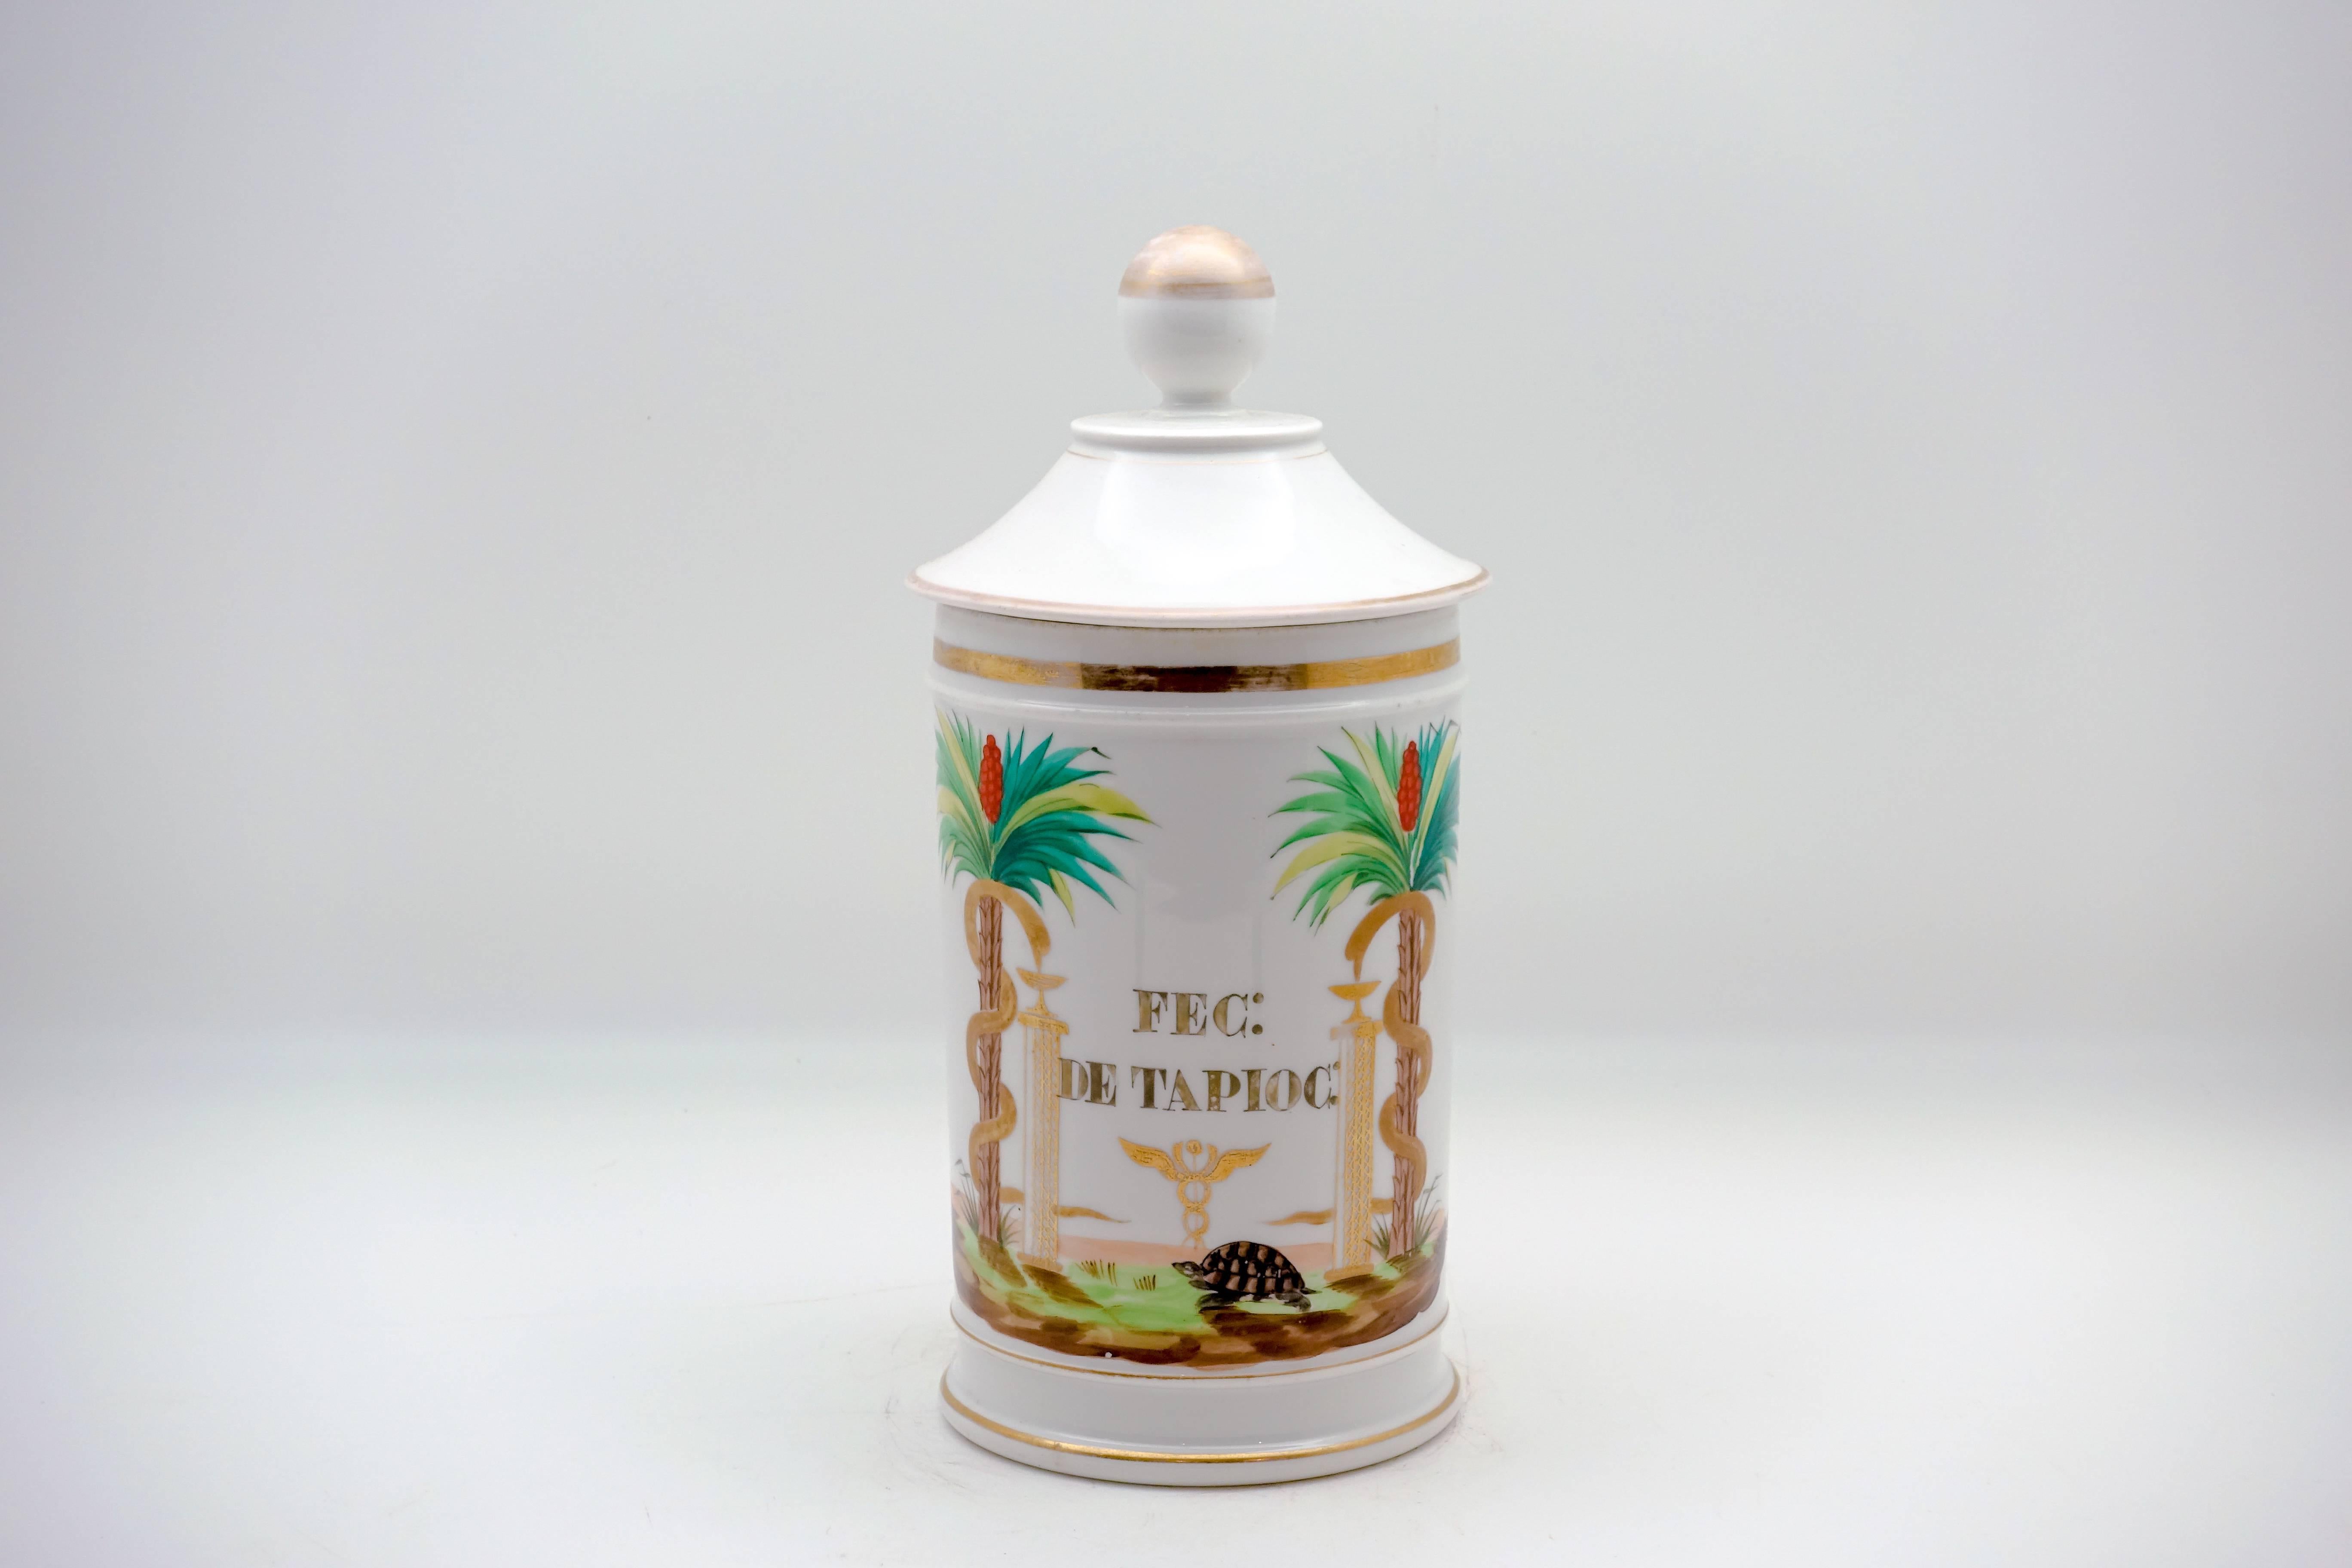 These 19th century pharmacy jars are as chic and charming as they get. 

A small tortoise is flanked by two towering palm trees alongside a column terminating in a Bowl of Hygieia. The serpent of Epidaurus is sipping from the bowl, and Hygieia was